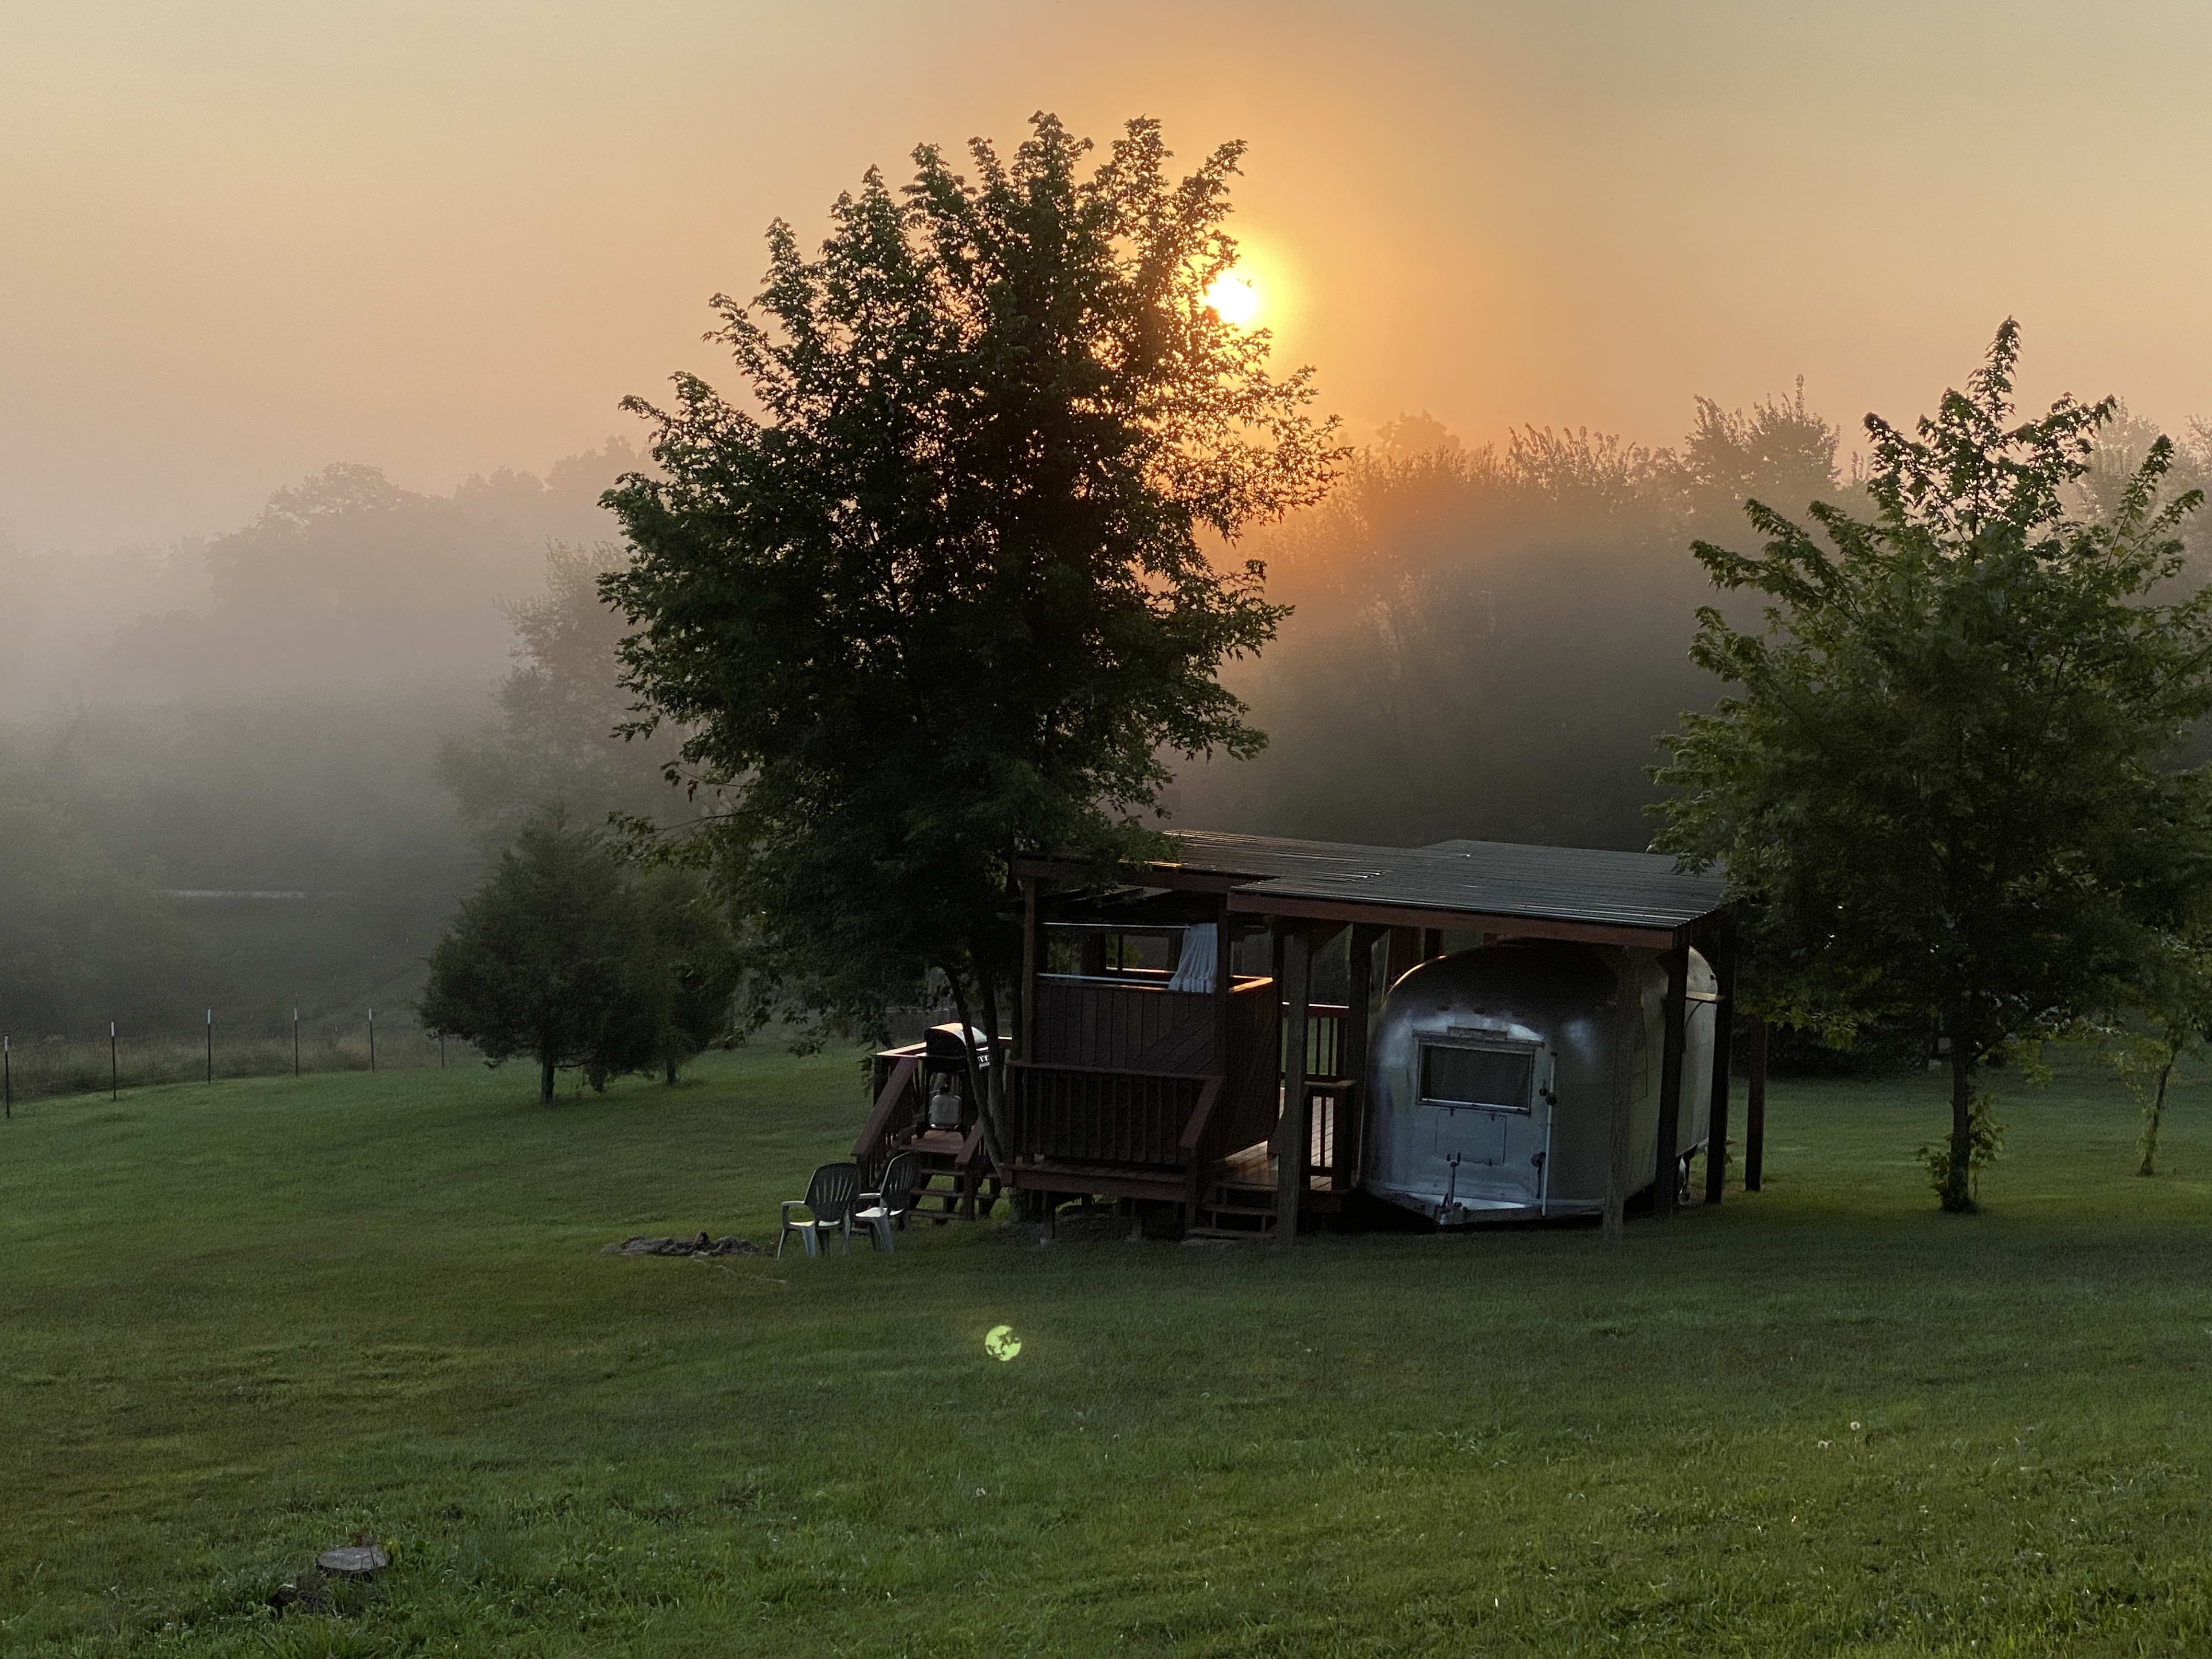 Sunrise over the Airstream on a Smoky Mountain style morning.